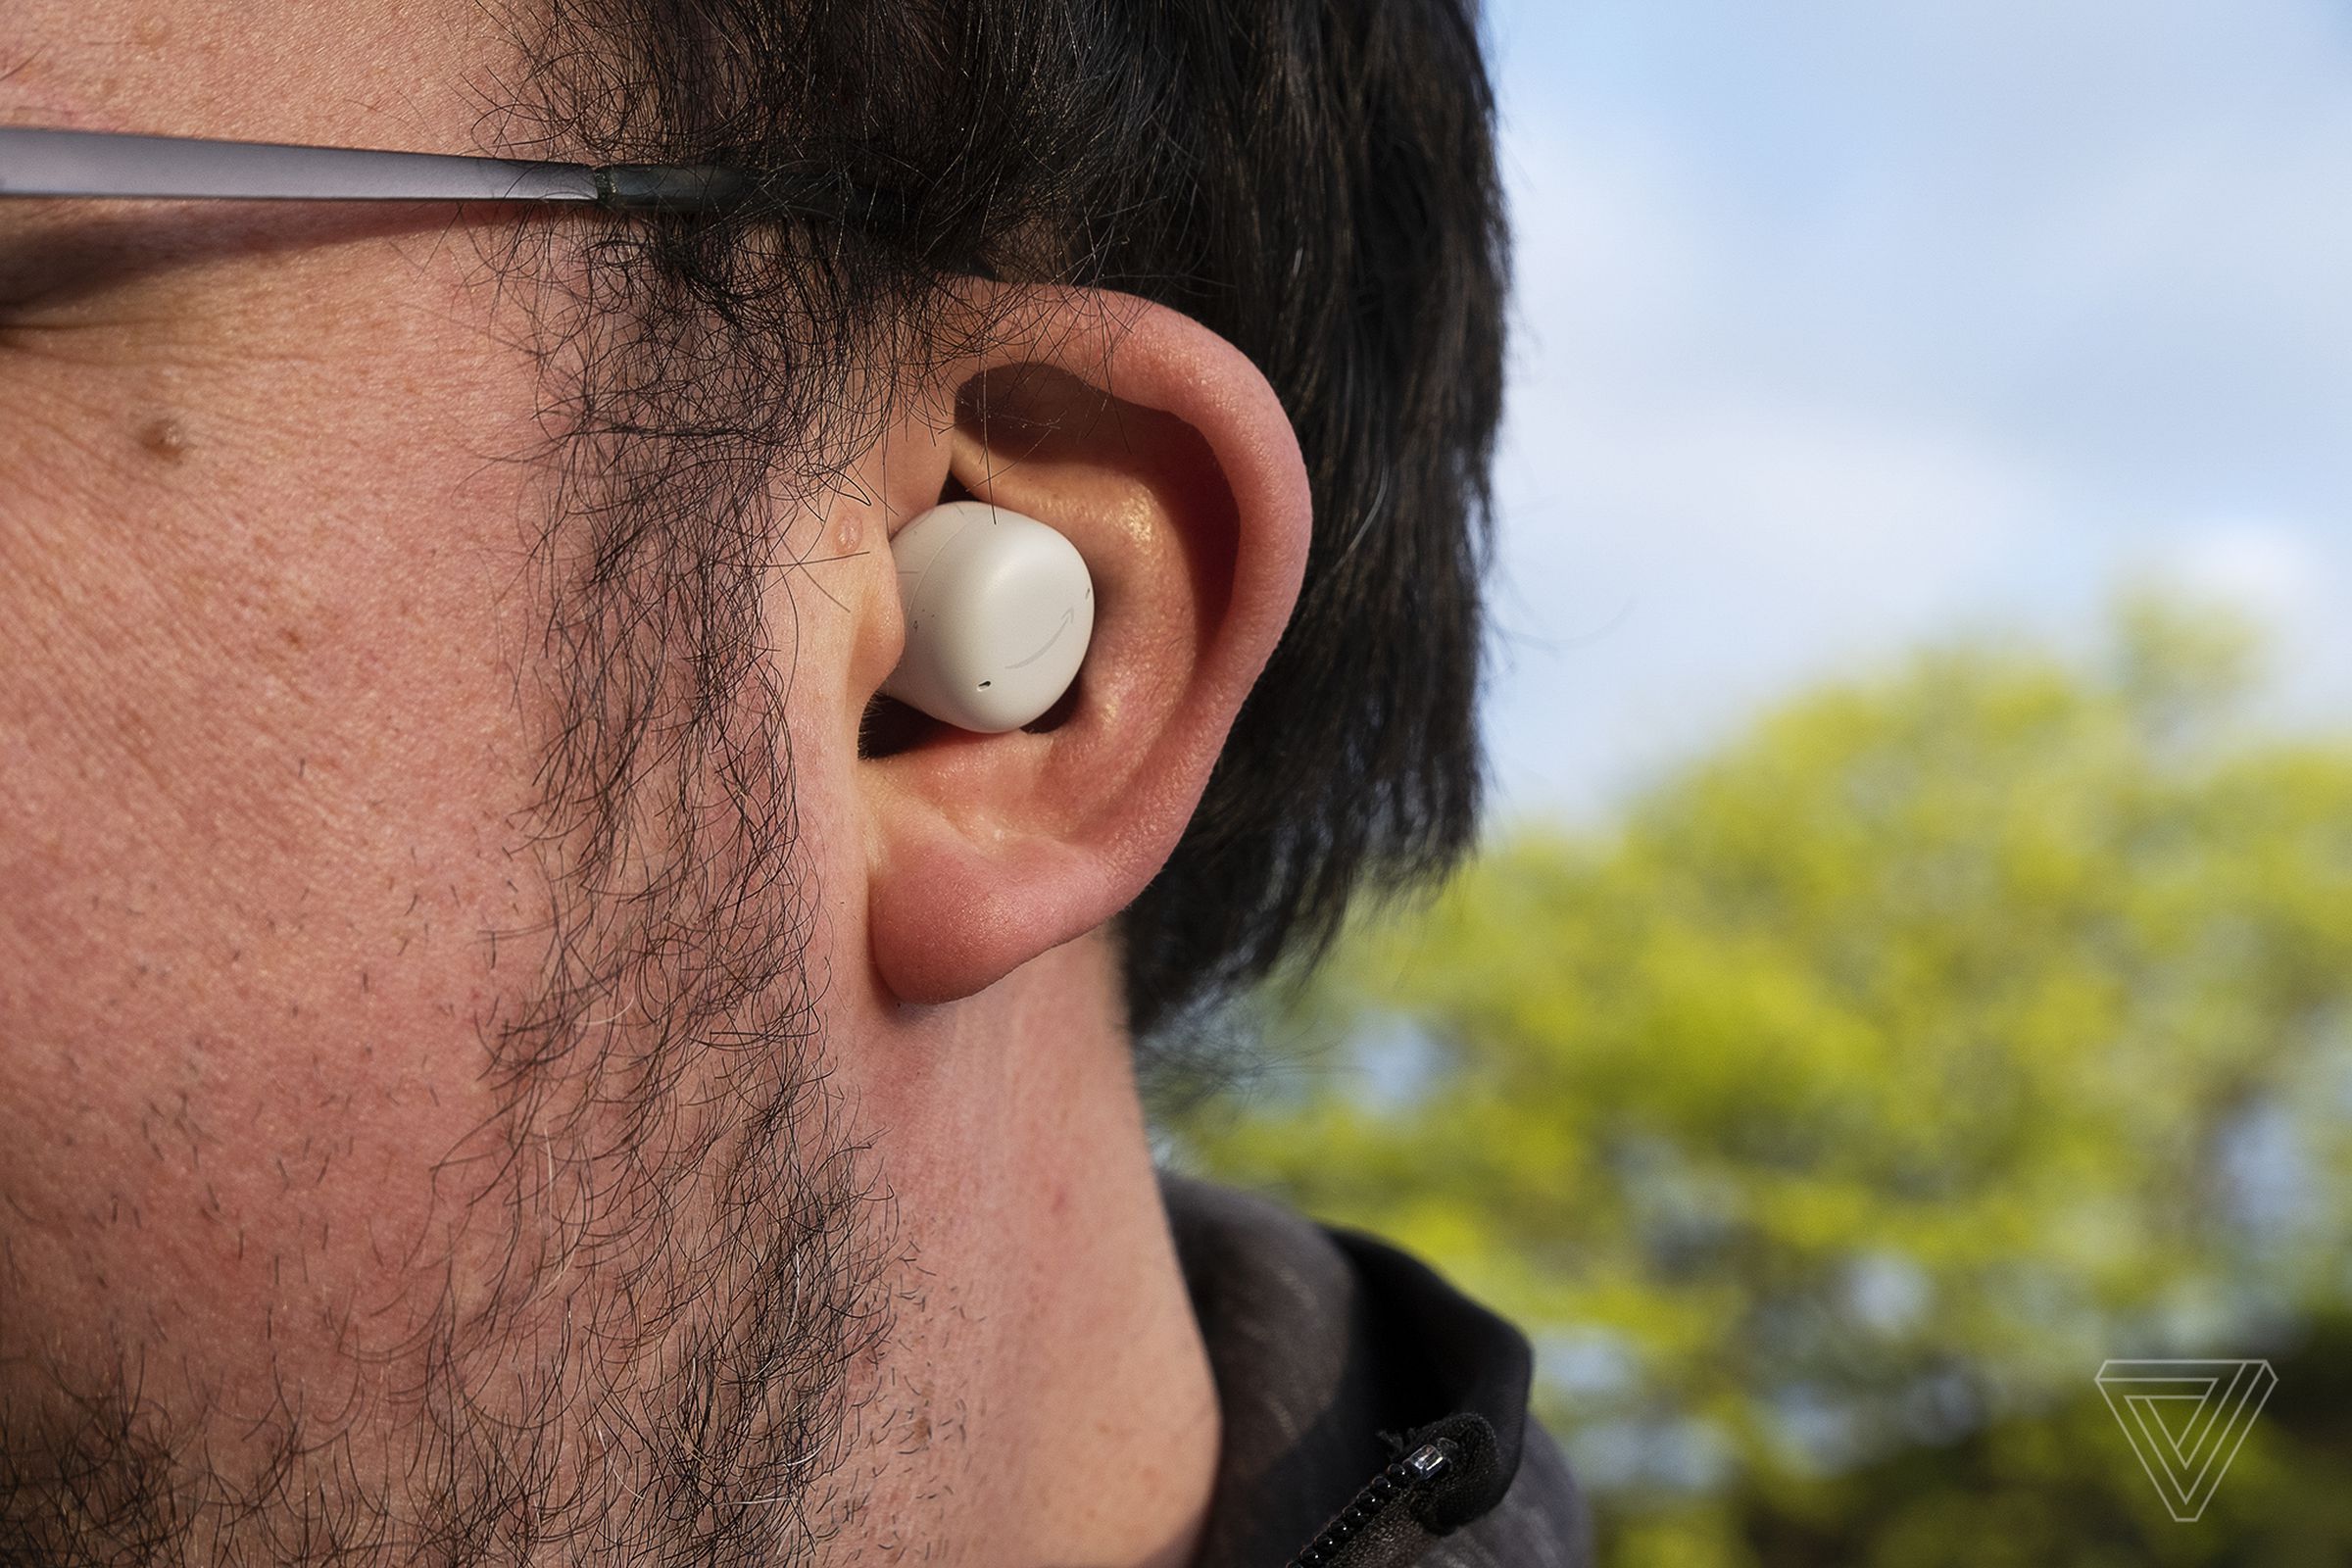 The earbuds have a vented design to reduce ear pressure.